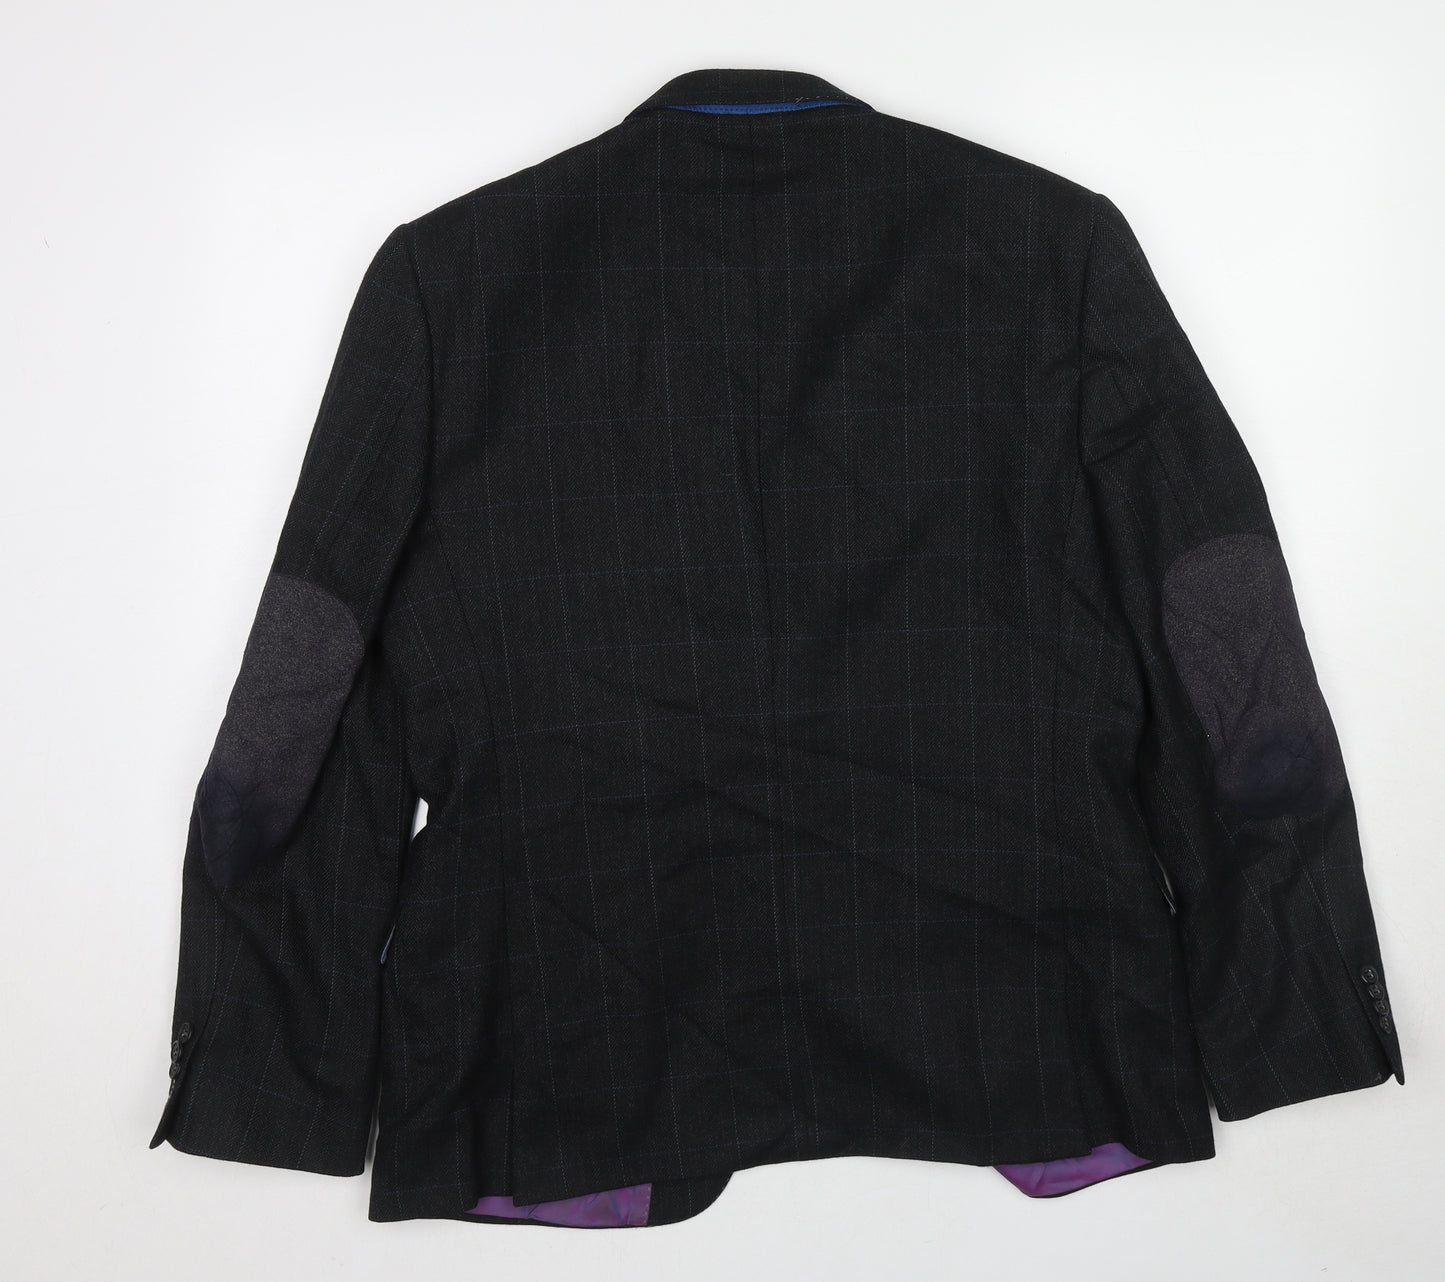 Holland & Quire Mens Black Striped Wool Jacket Blazer Size 44 Regular - Elbow Patches